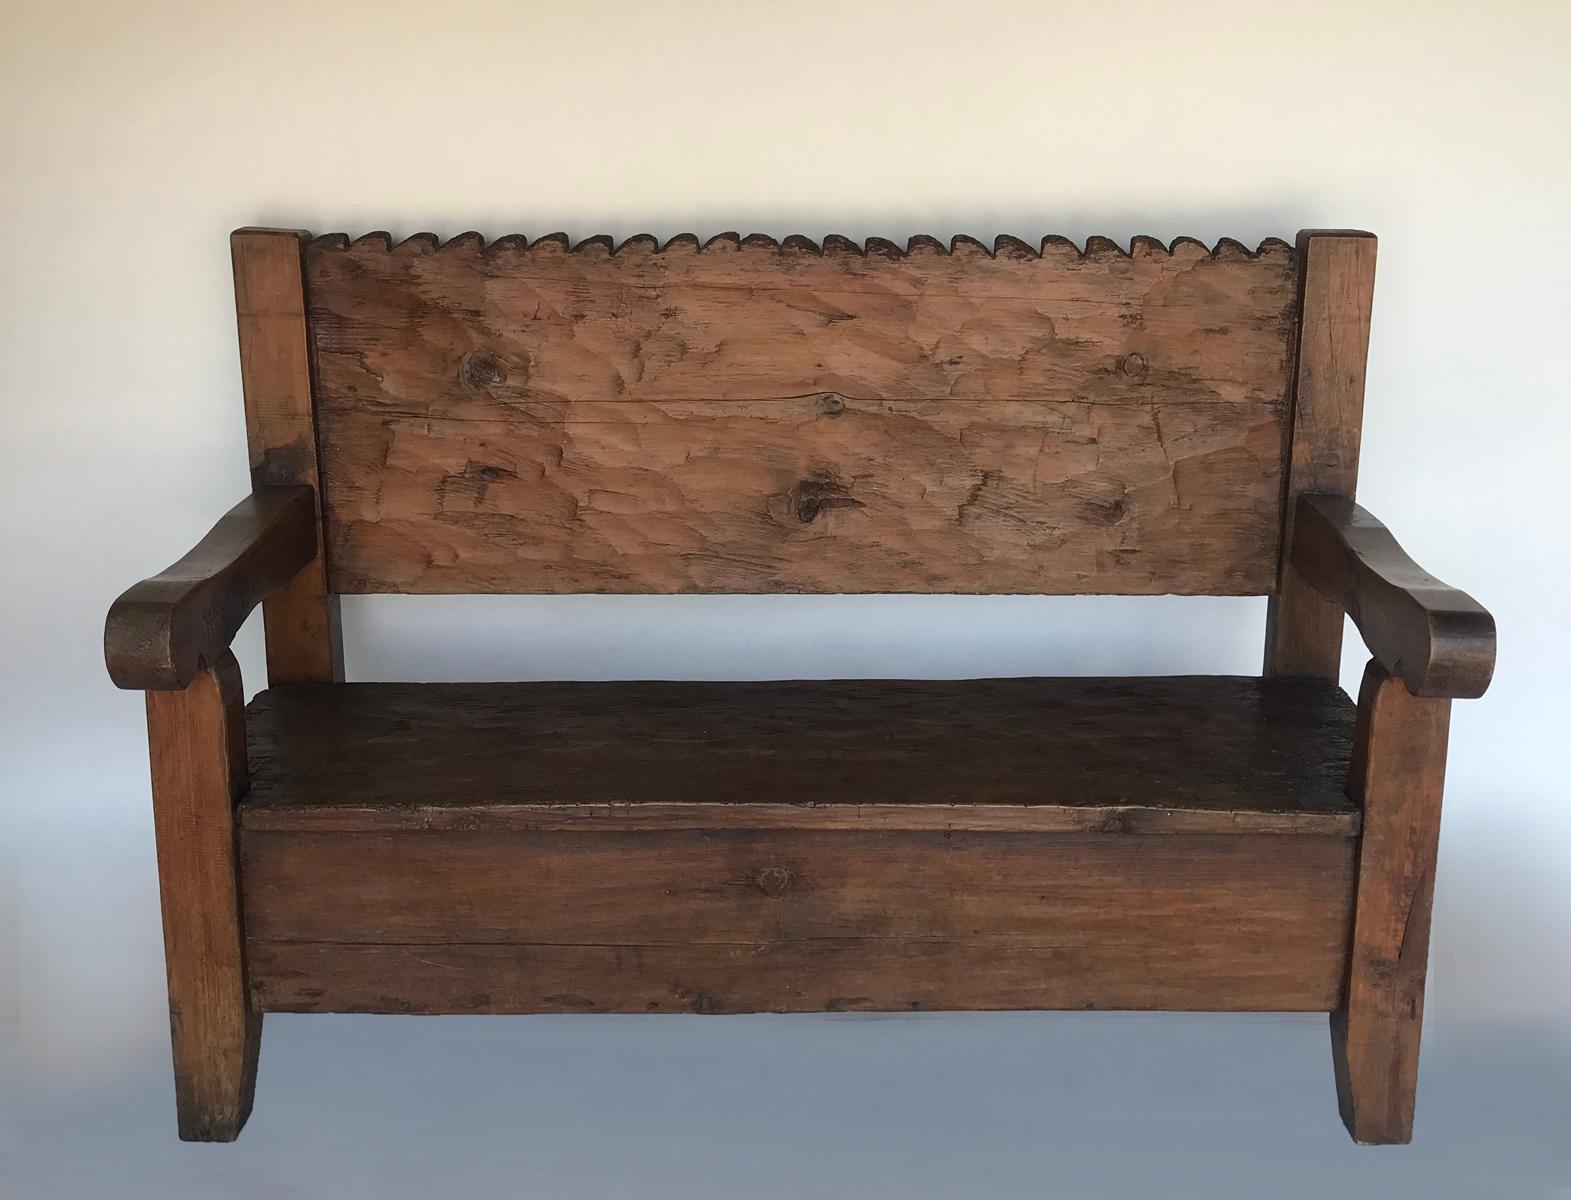 Very sweet, petite, rustic Chajul bench from the highlands of Guatemala. The back and seat are both one wide boards traditionally hand hewn by machete. Bench back features scallops in a wave pattern.
Age appropriate wear throughout. Sturdy and